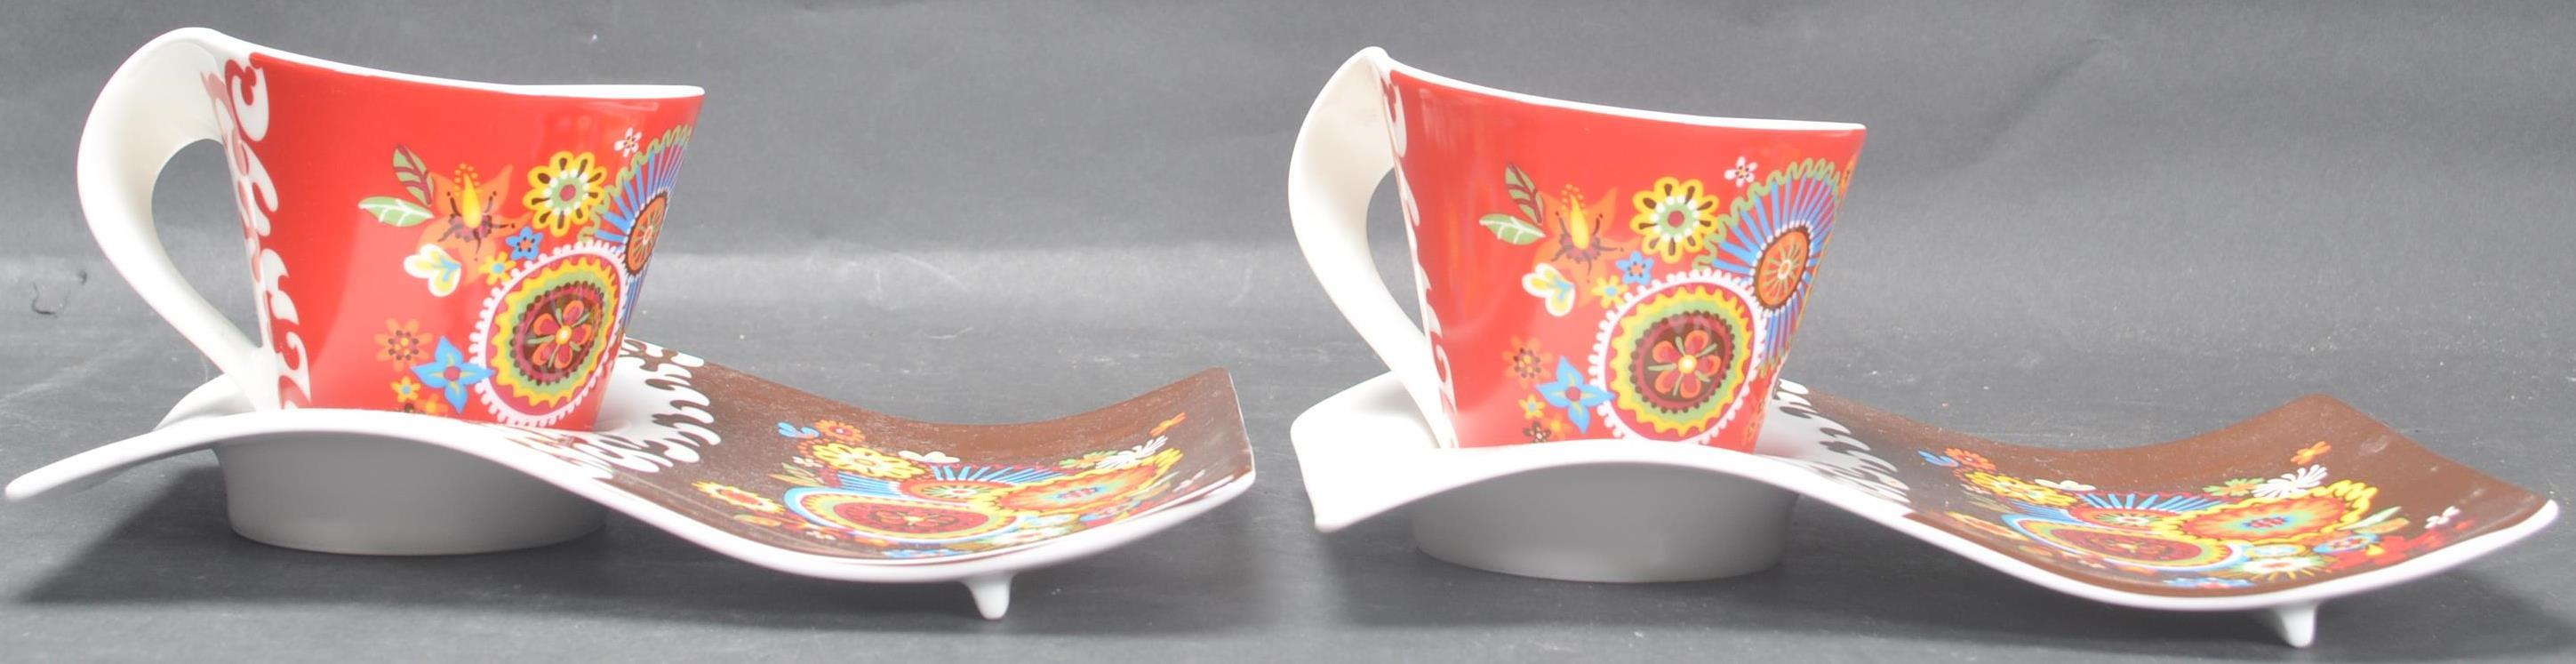 TWO VILLEROY & BOCH TEA CUPS AND SAUCERS